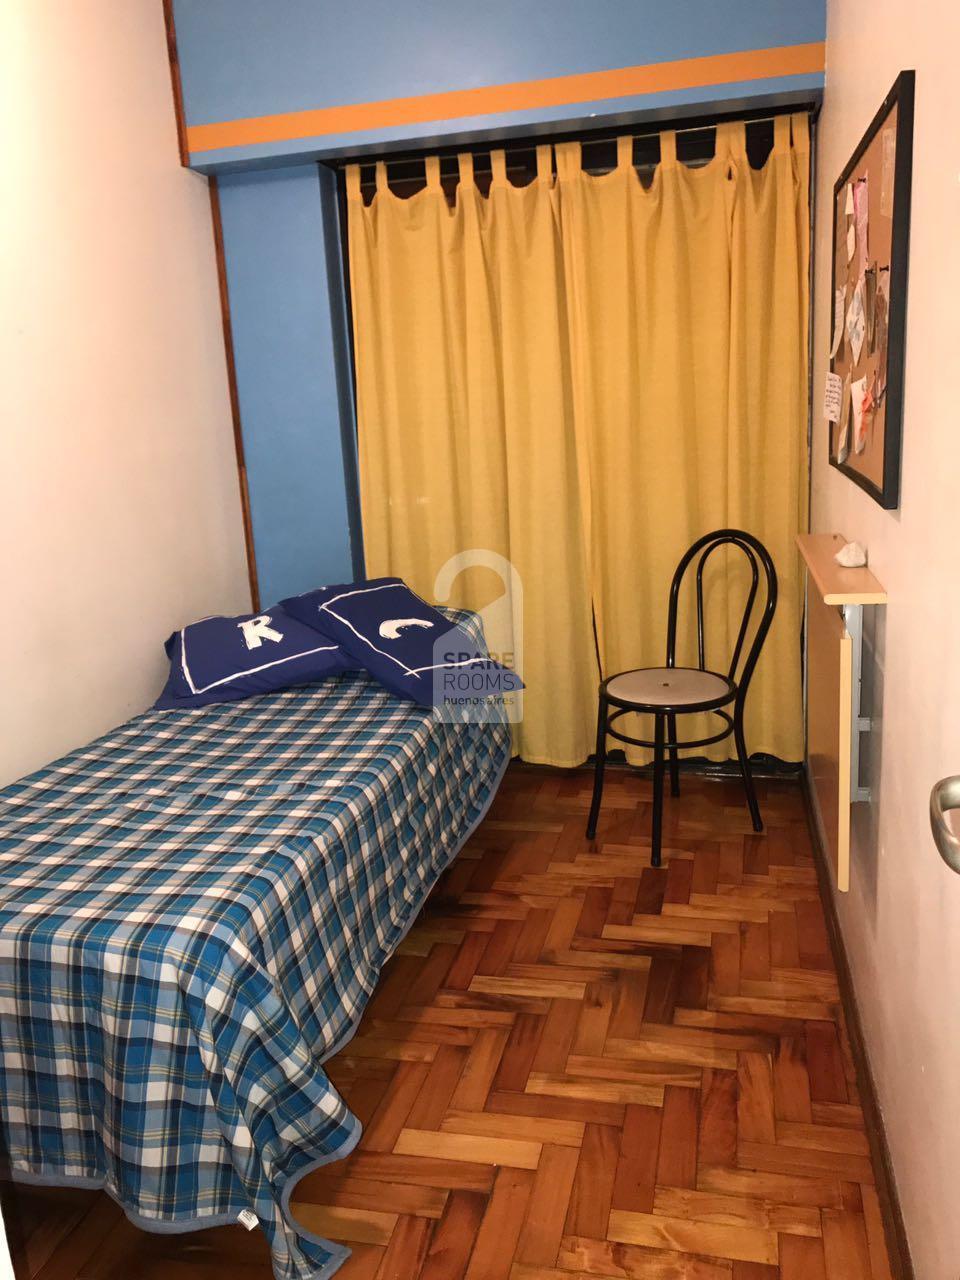 The bedroom at the apartment in Belgrano